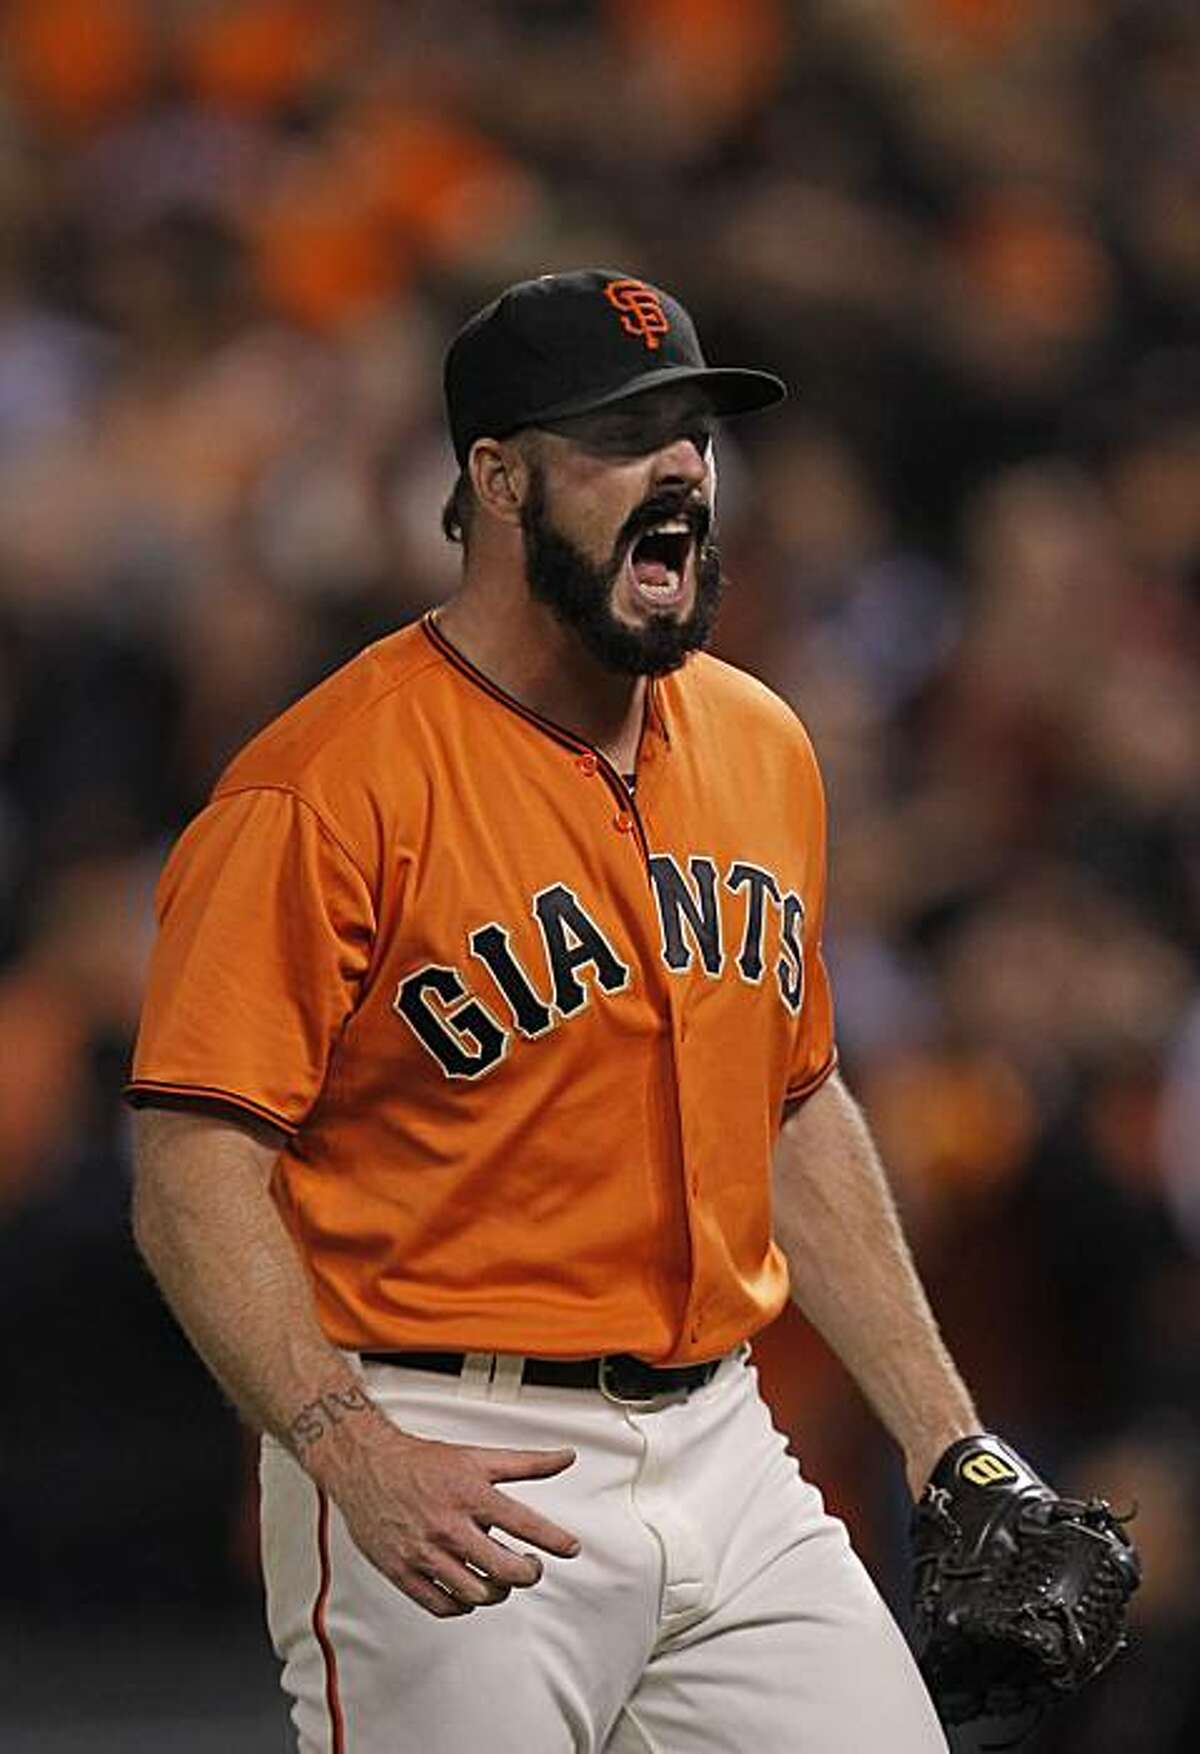 Giants pitcher Brian Wilson reacts as he closes out the 8th inning, as the San Francisco Giants battle the Atlanta Braves in game 2 of the National League Division Series at AT&T Park on Friday Oct. 8, 2010, in San Francisco, Calif.,